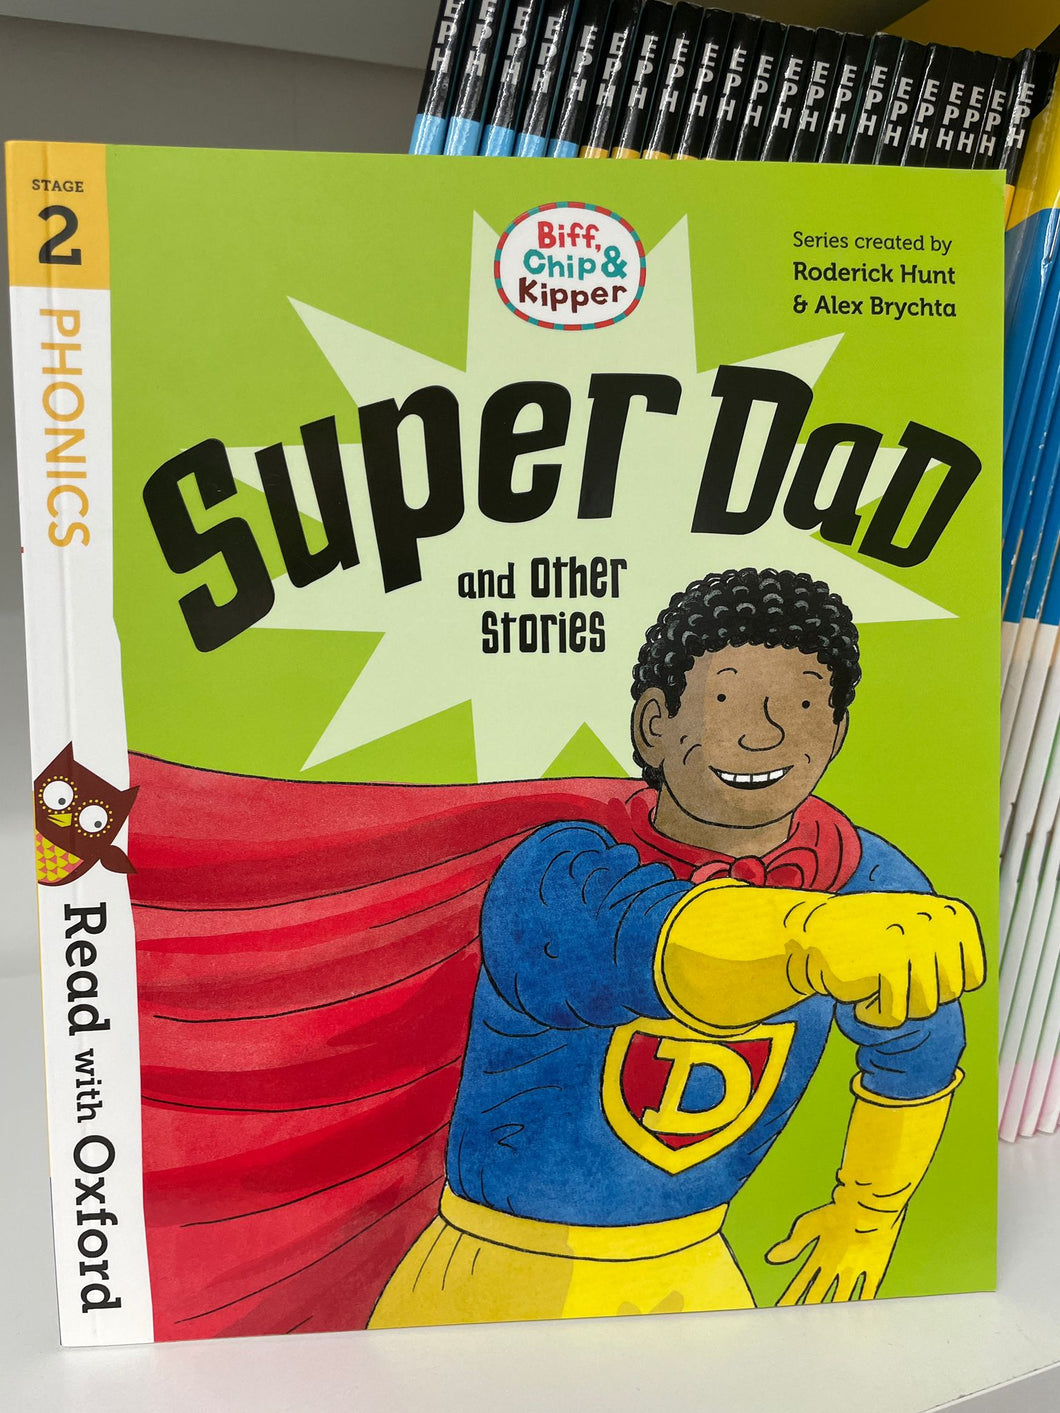 OUP Read with Oxford Stage 2 Super Dad